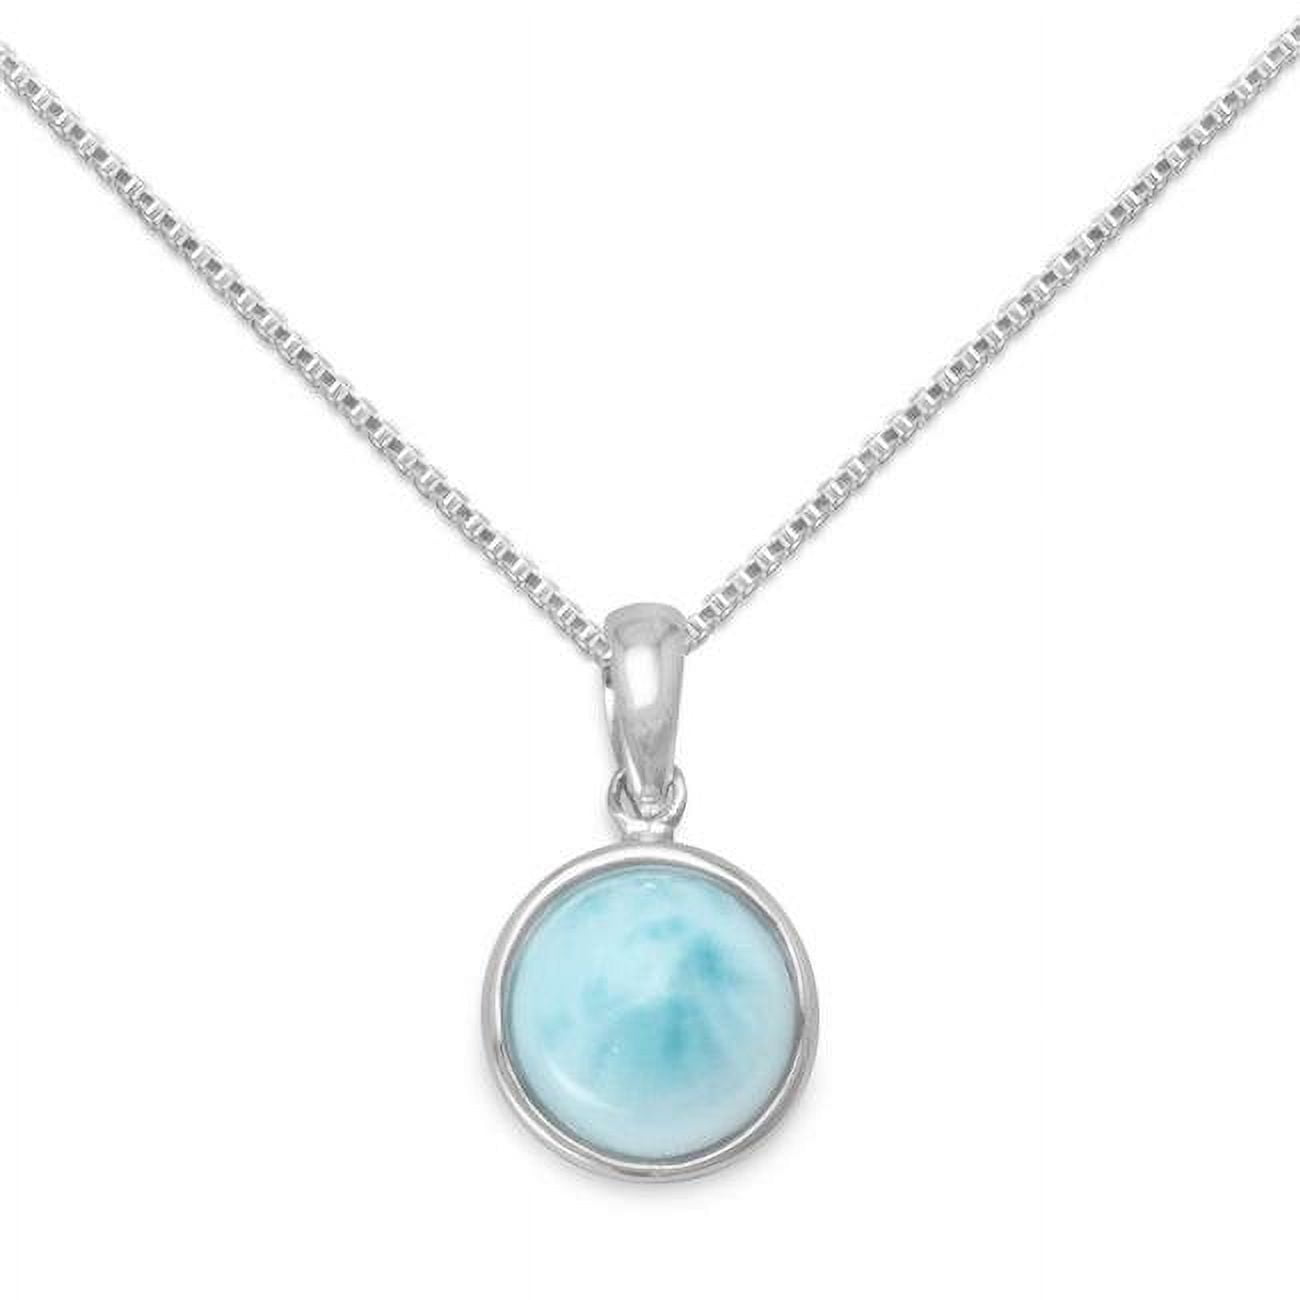 74276-22 22 In. Sterling Silver Round-shape Blue Larimar Pendant With 1.5 Mm Box Chain